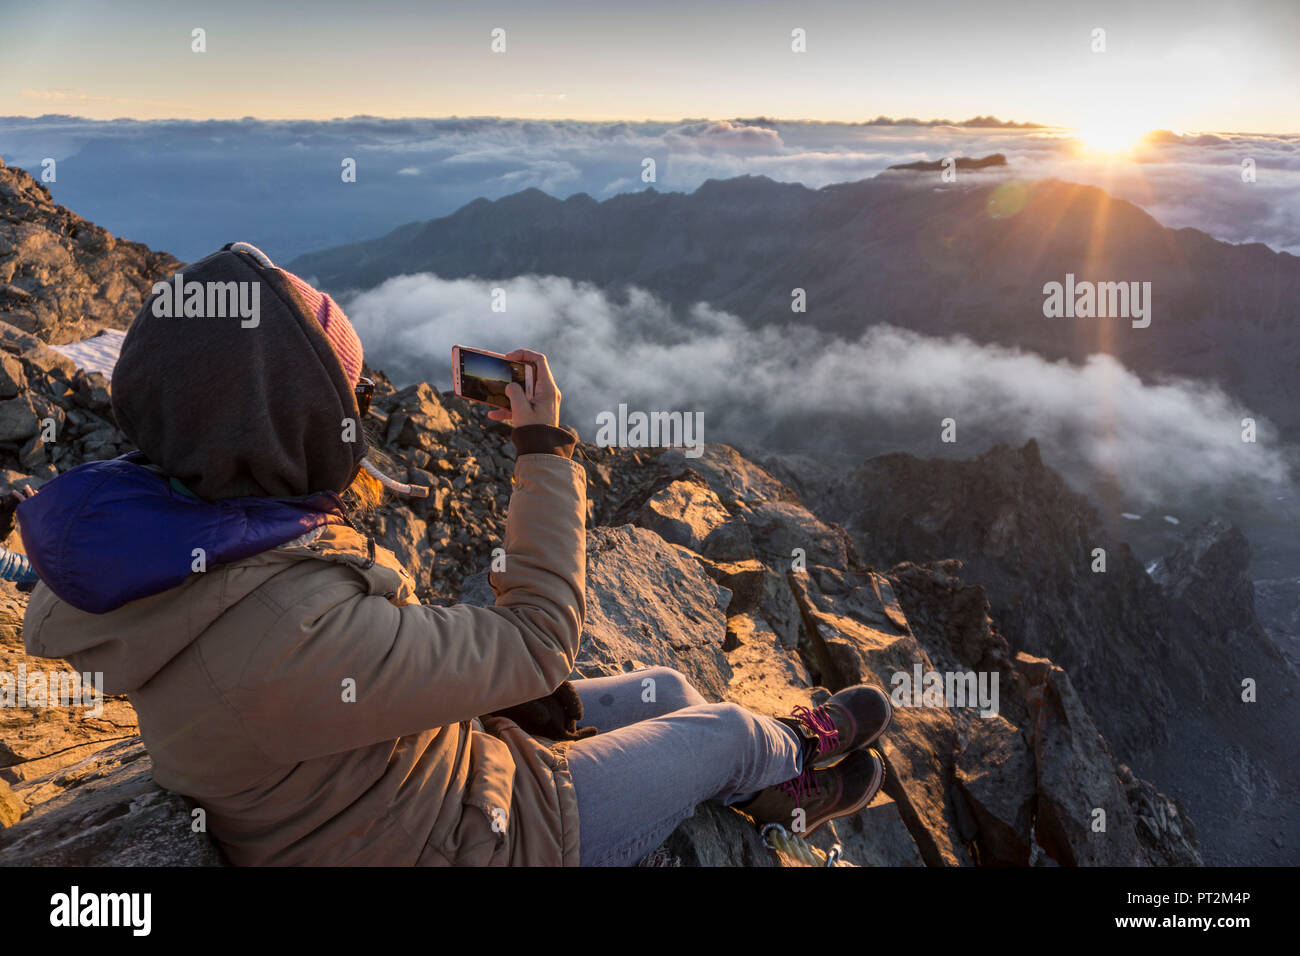 Switzerland, canton Valais, district Entremont, Verbier, sunrise, 3329 m high Mont Fort, woman with smartphone photographing sunrise Stock Photo